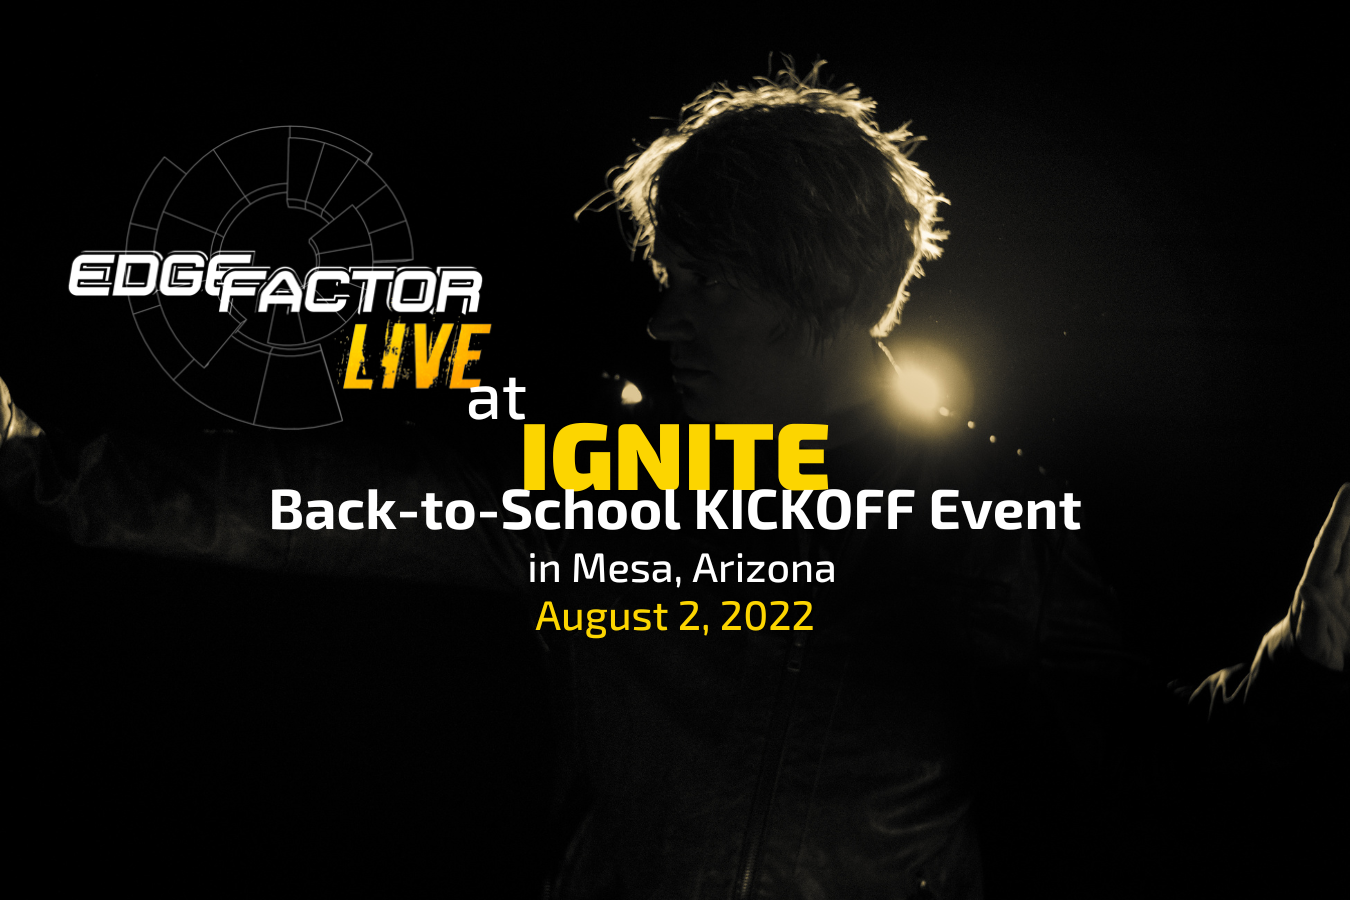 Jeremy Bout at Ignite Back to school kickoff event in Arizona